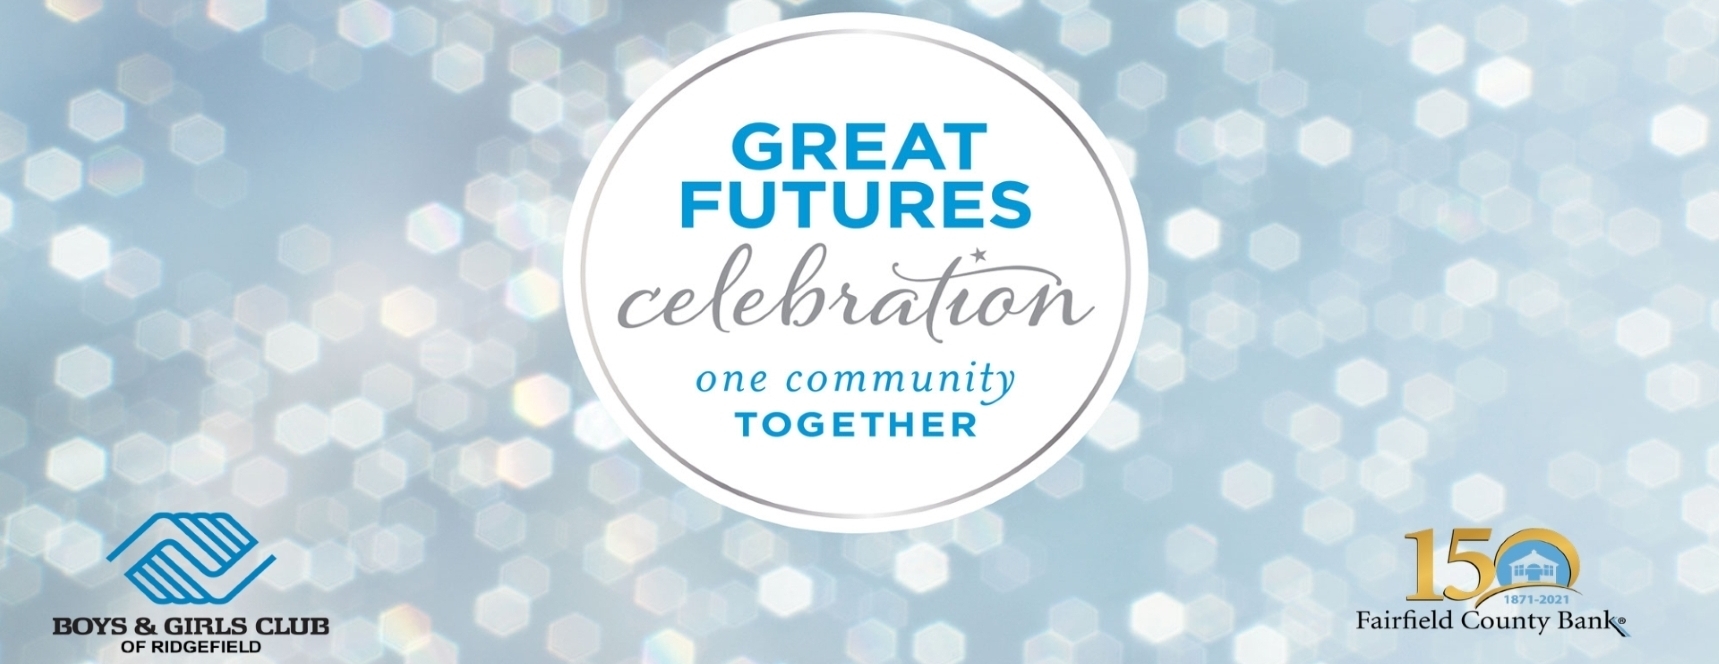 Great Futures Celebration: One Community Together